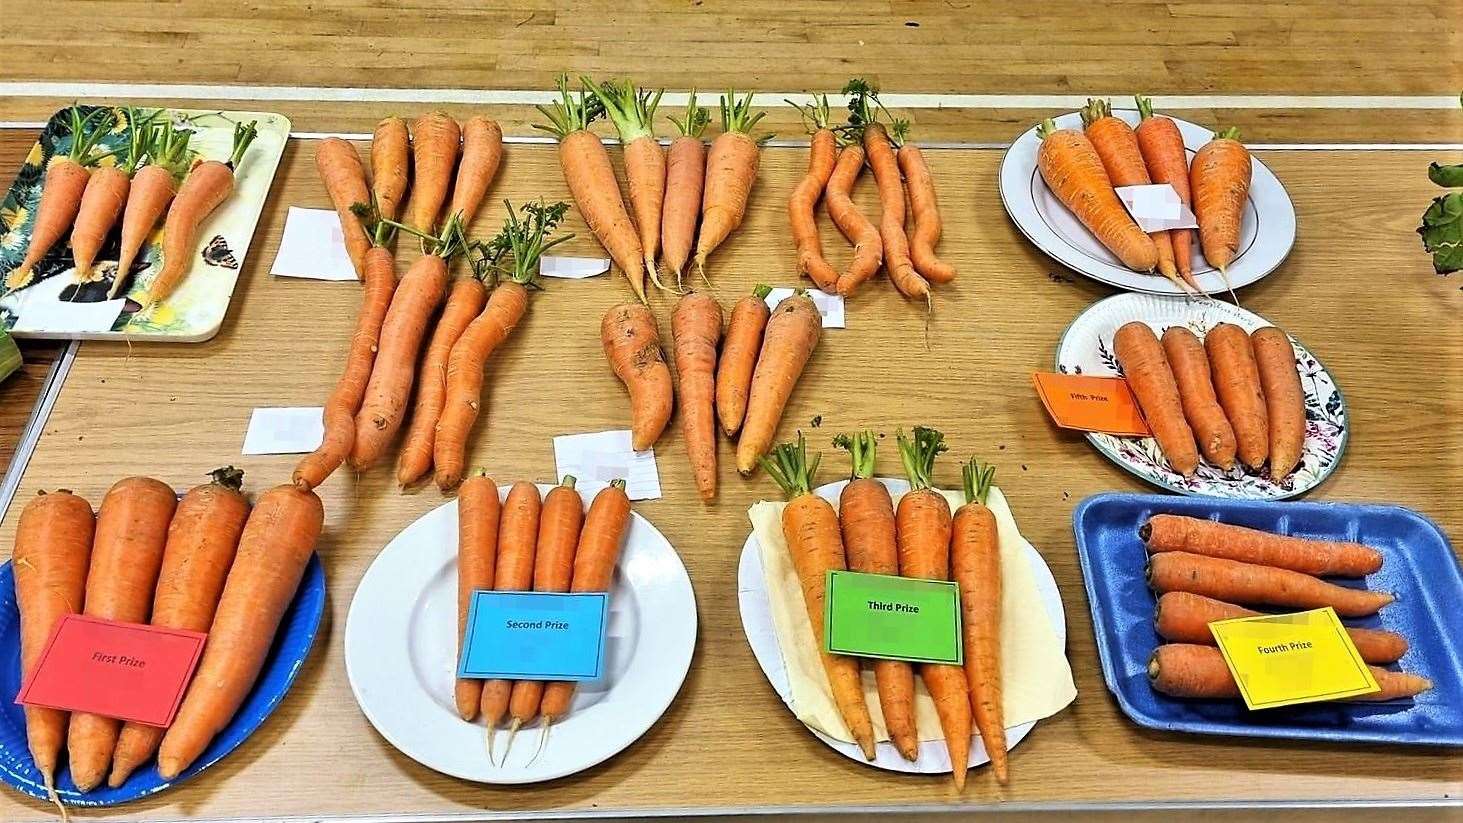 Carrots on display at a previous seed and root show.